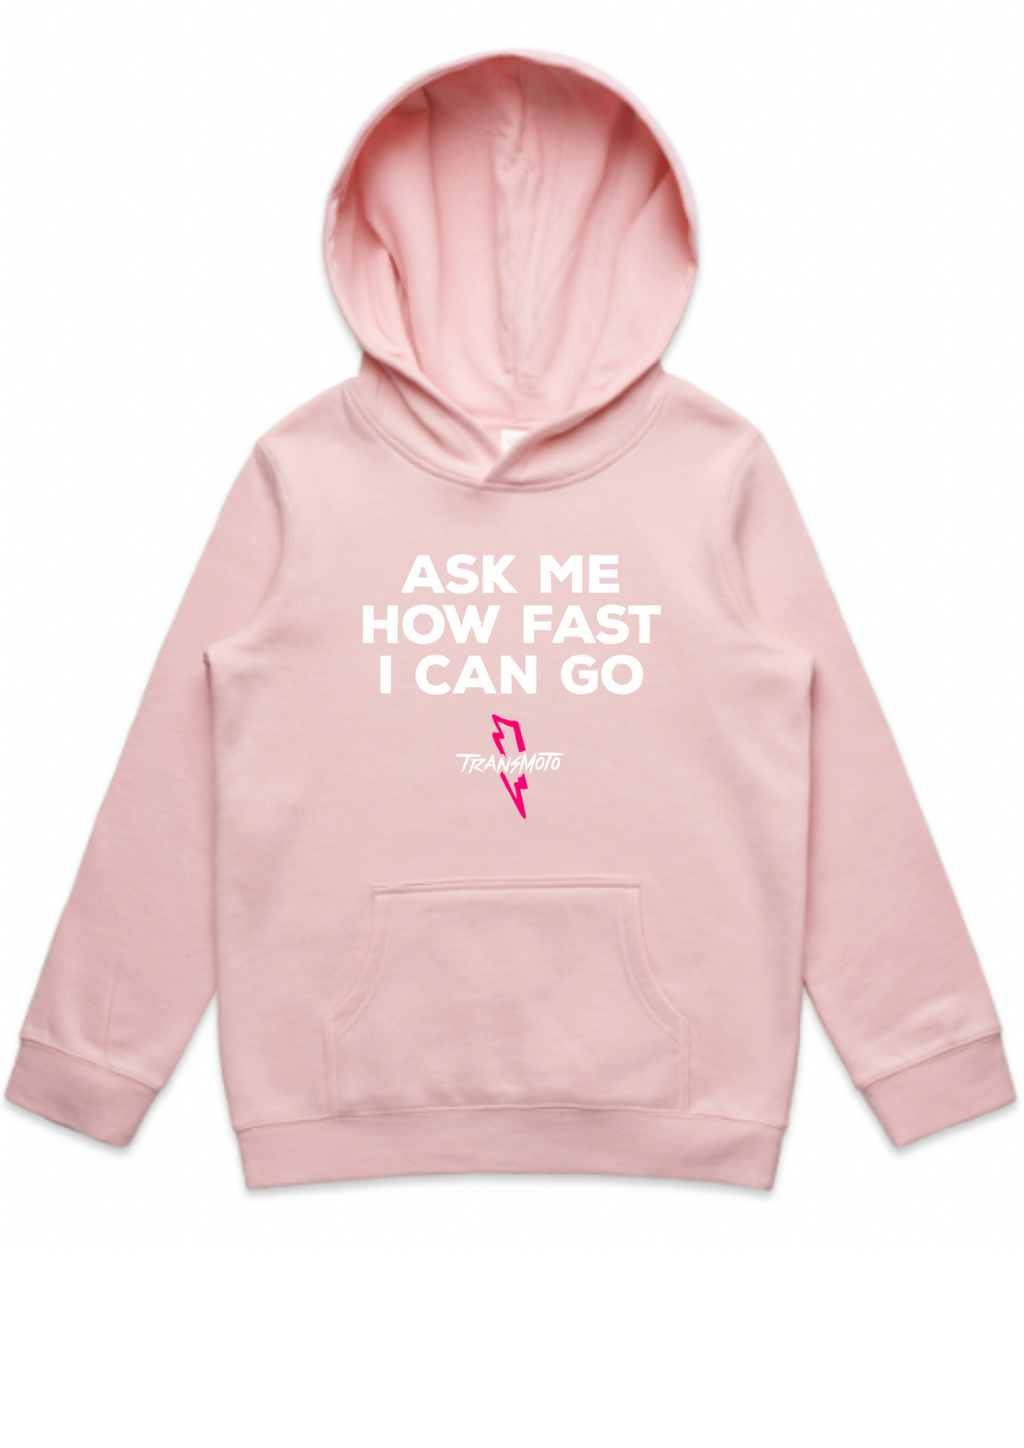 HOW FAST CAN YOU GO HOOD? (Pink)